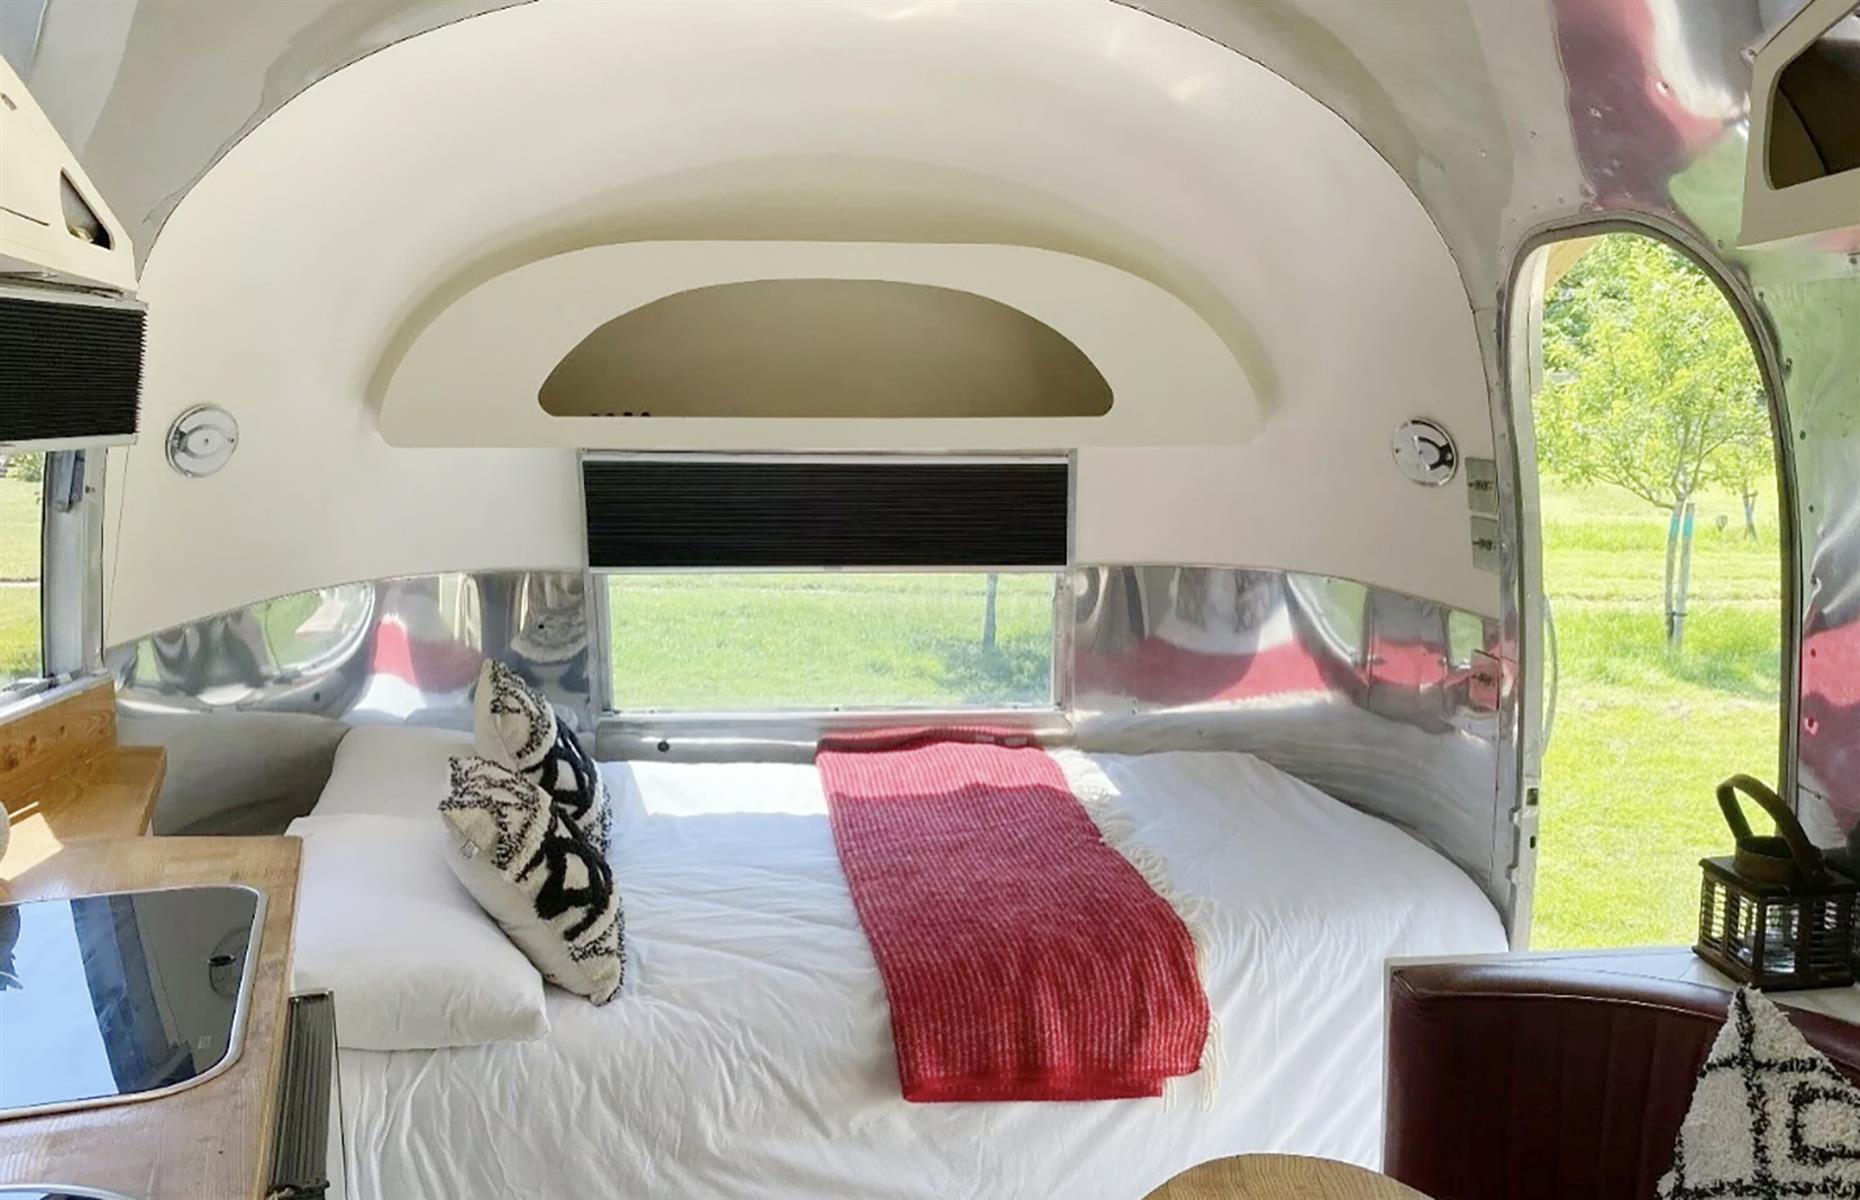 <p>New to the UK's Airstream glamping scene in 2022 is this supremely cozy, compact Silverbird Airstream in Leicestershire. Not only is it a cute little bolthole for a romantic weekend away, but its situated on the lovely <a href="https://www.brookmeadow.co.uk/">Brook Meadow campsite</a>, which has been nominated for a Visit England Excellence Award. </p>